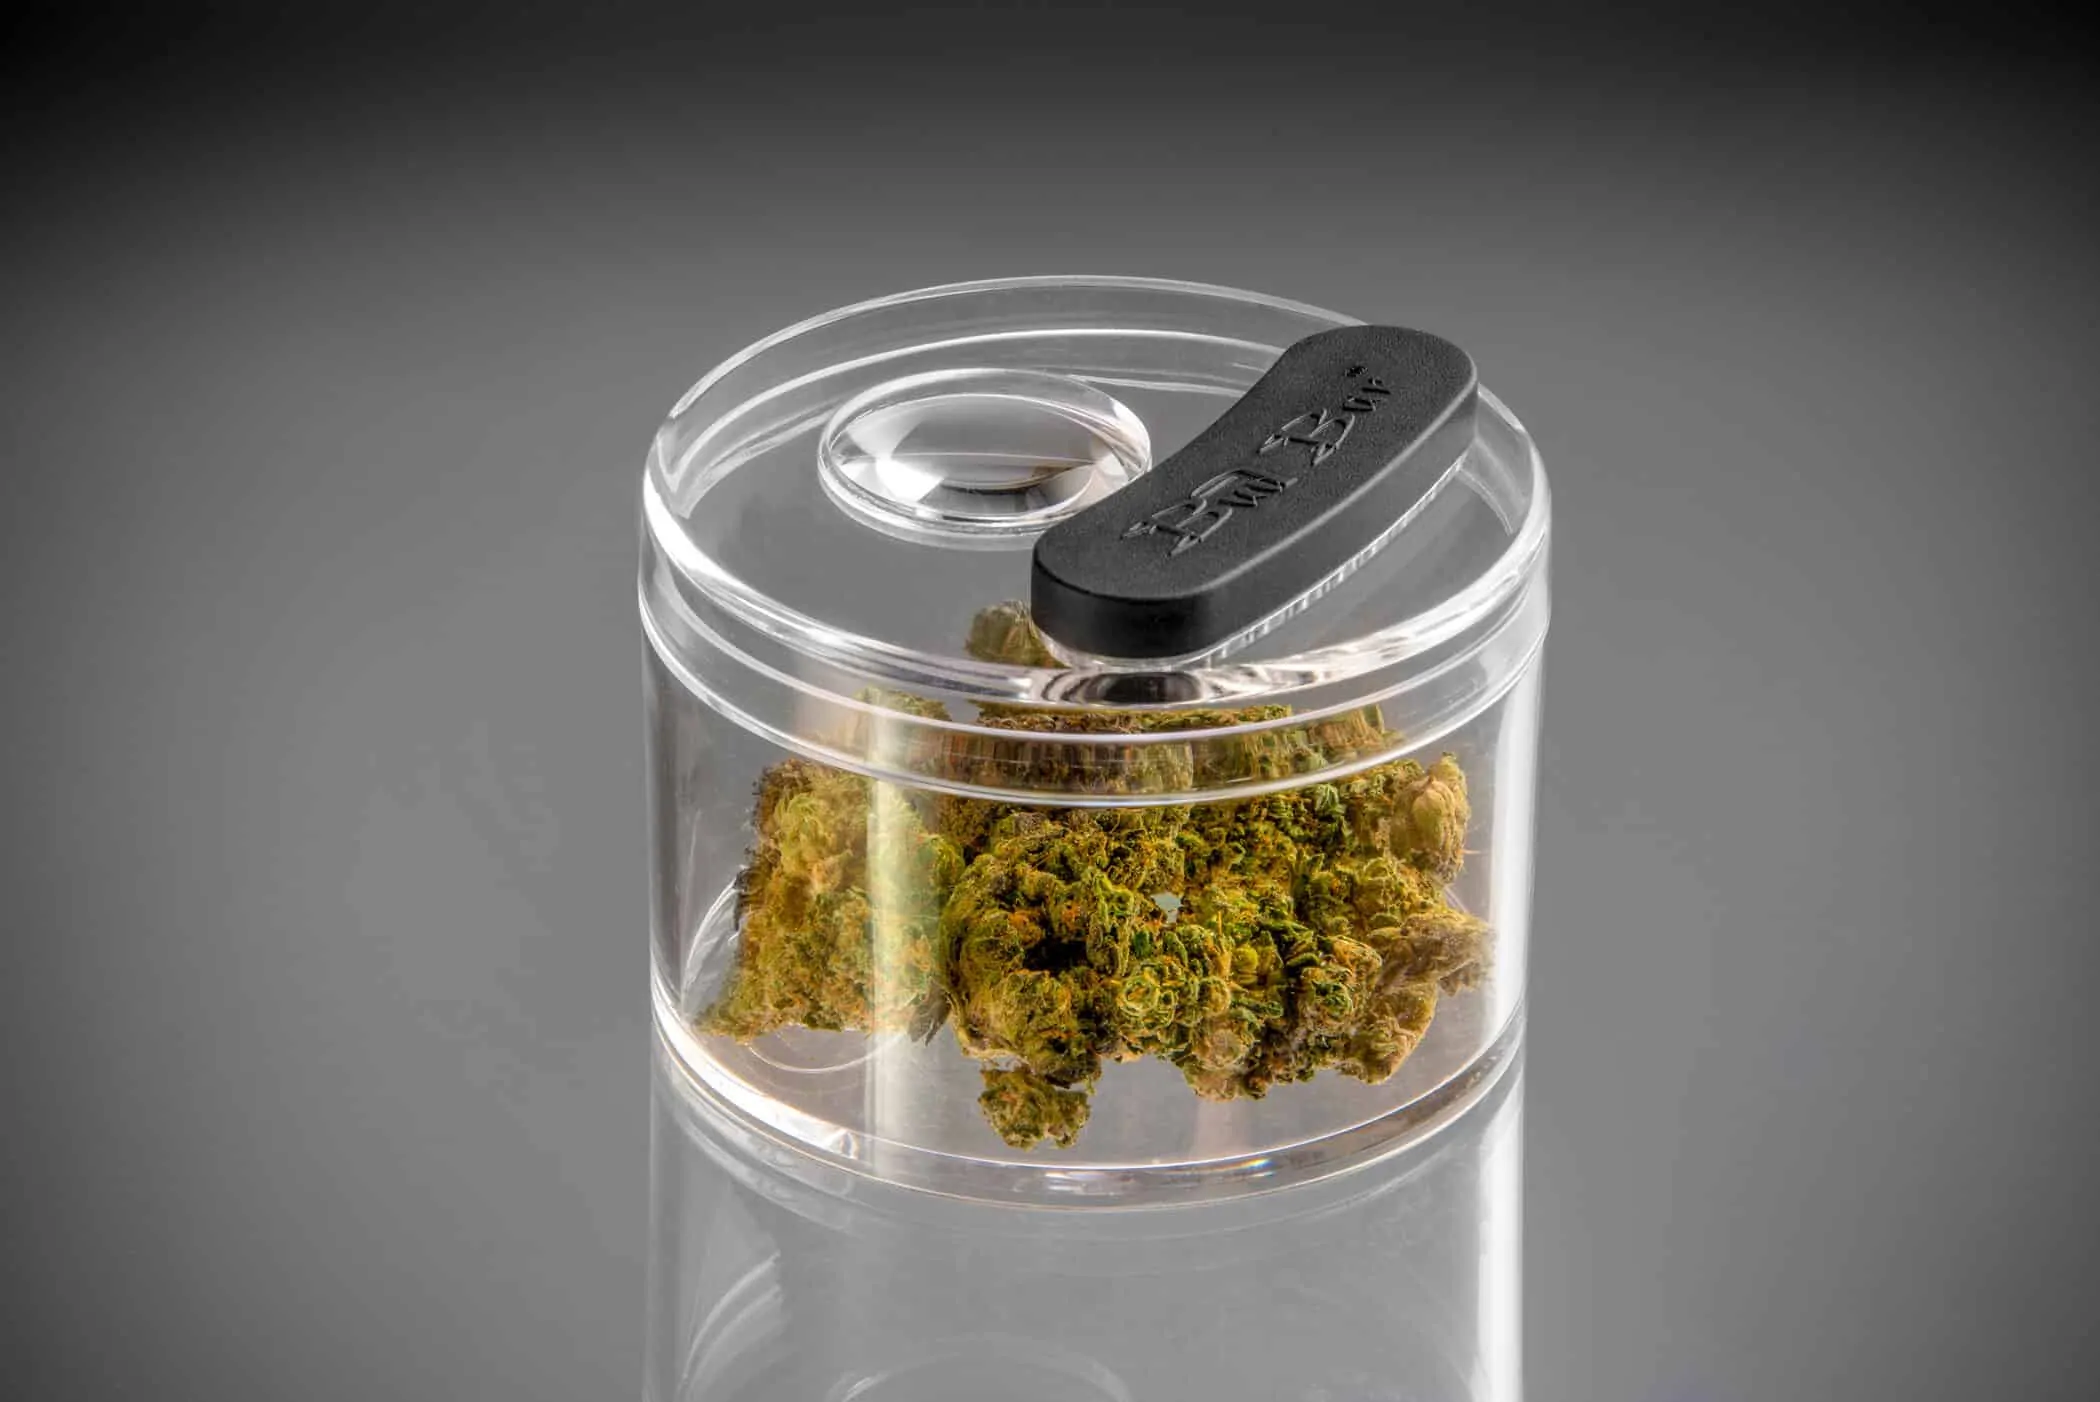 15 Marijuana Containers To Securely Hide Your Stash